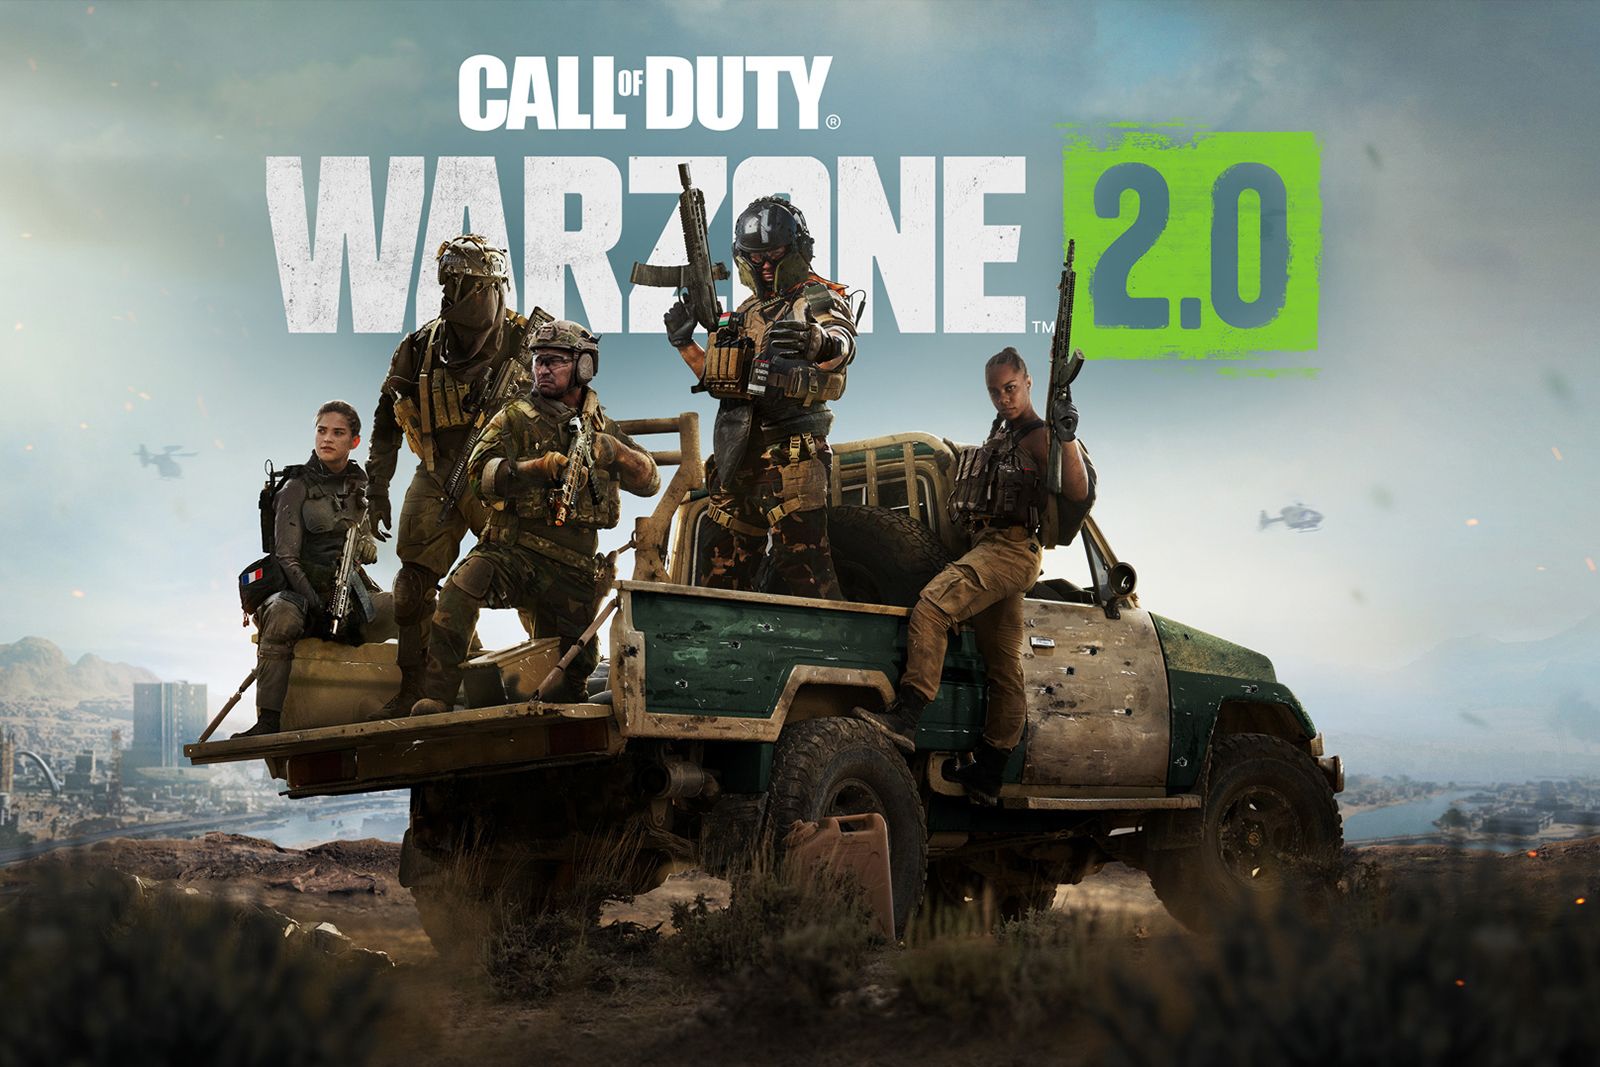 Call of Duty Warzone 2.0 release date, gameplay, and more